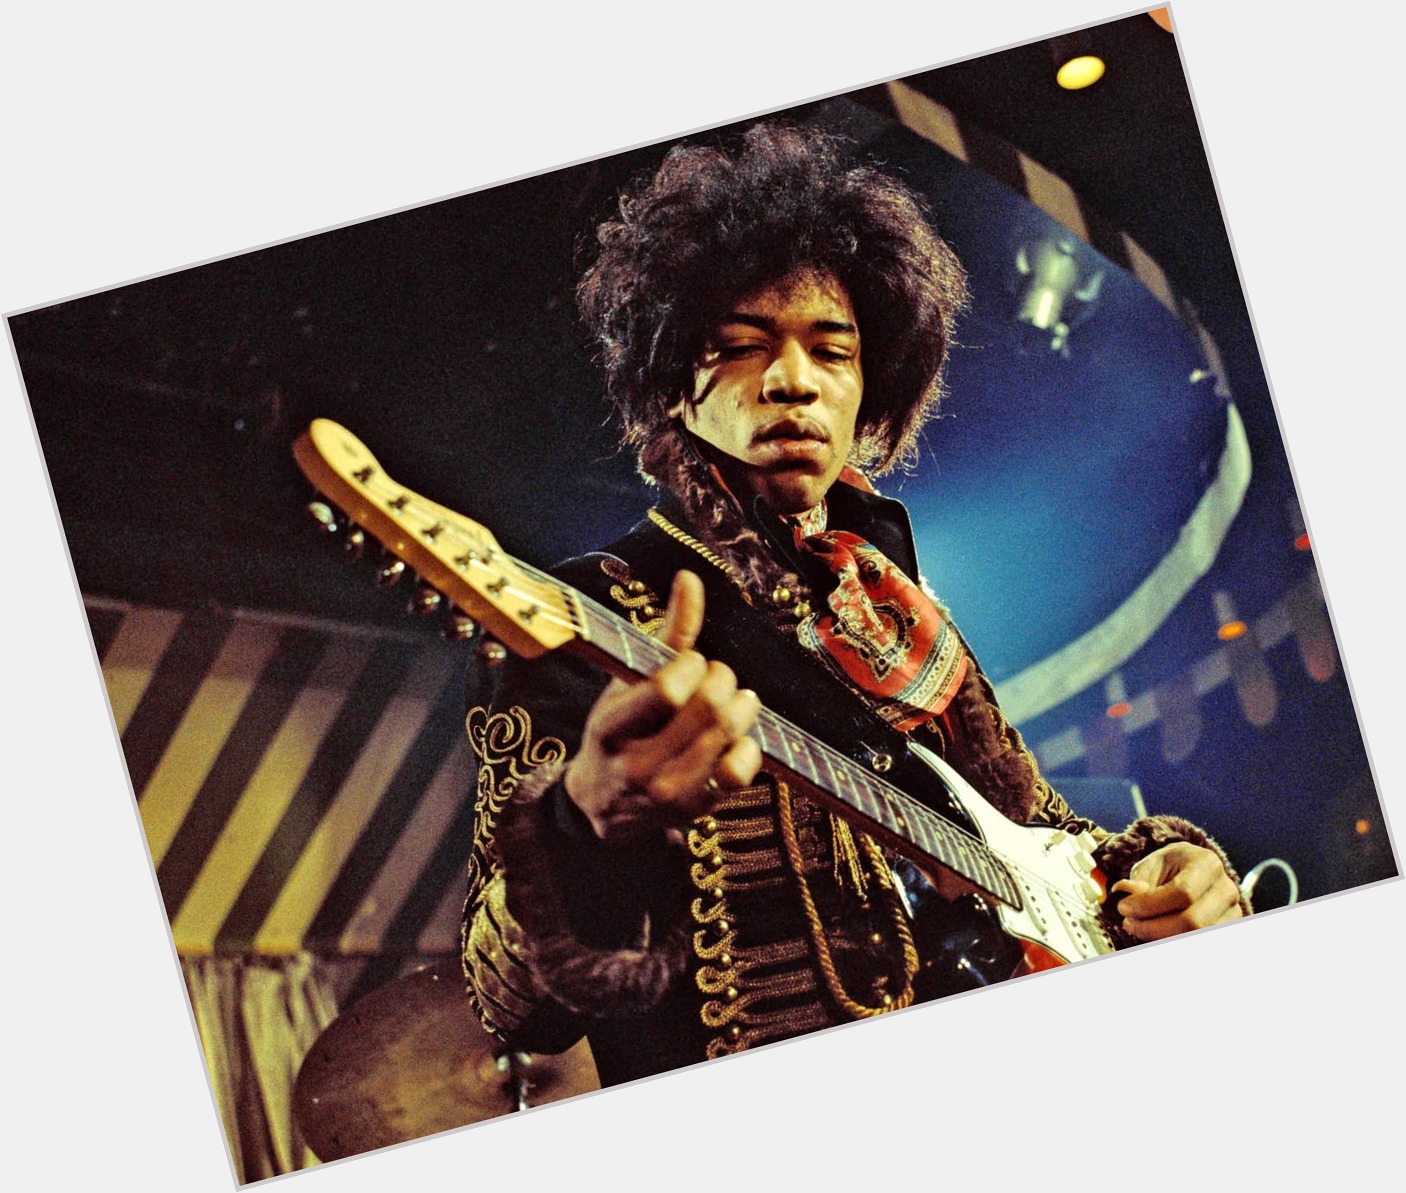 Happy birthday to Jimi Hendrix! The legendary musician would\ve turned 79 today. 